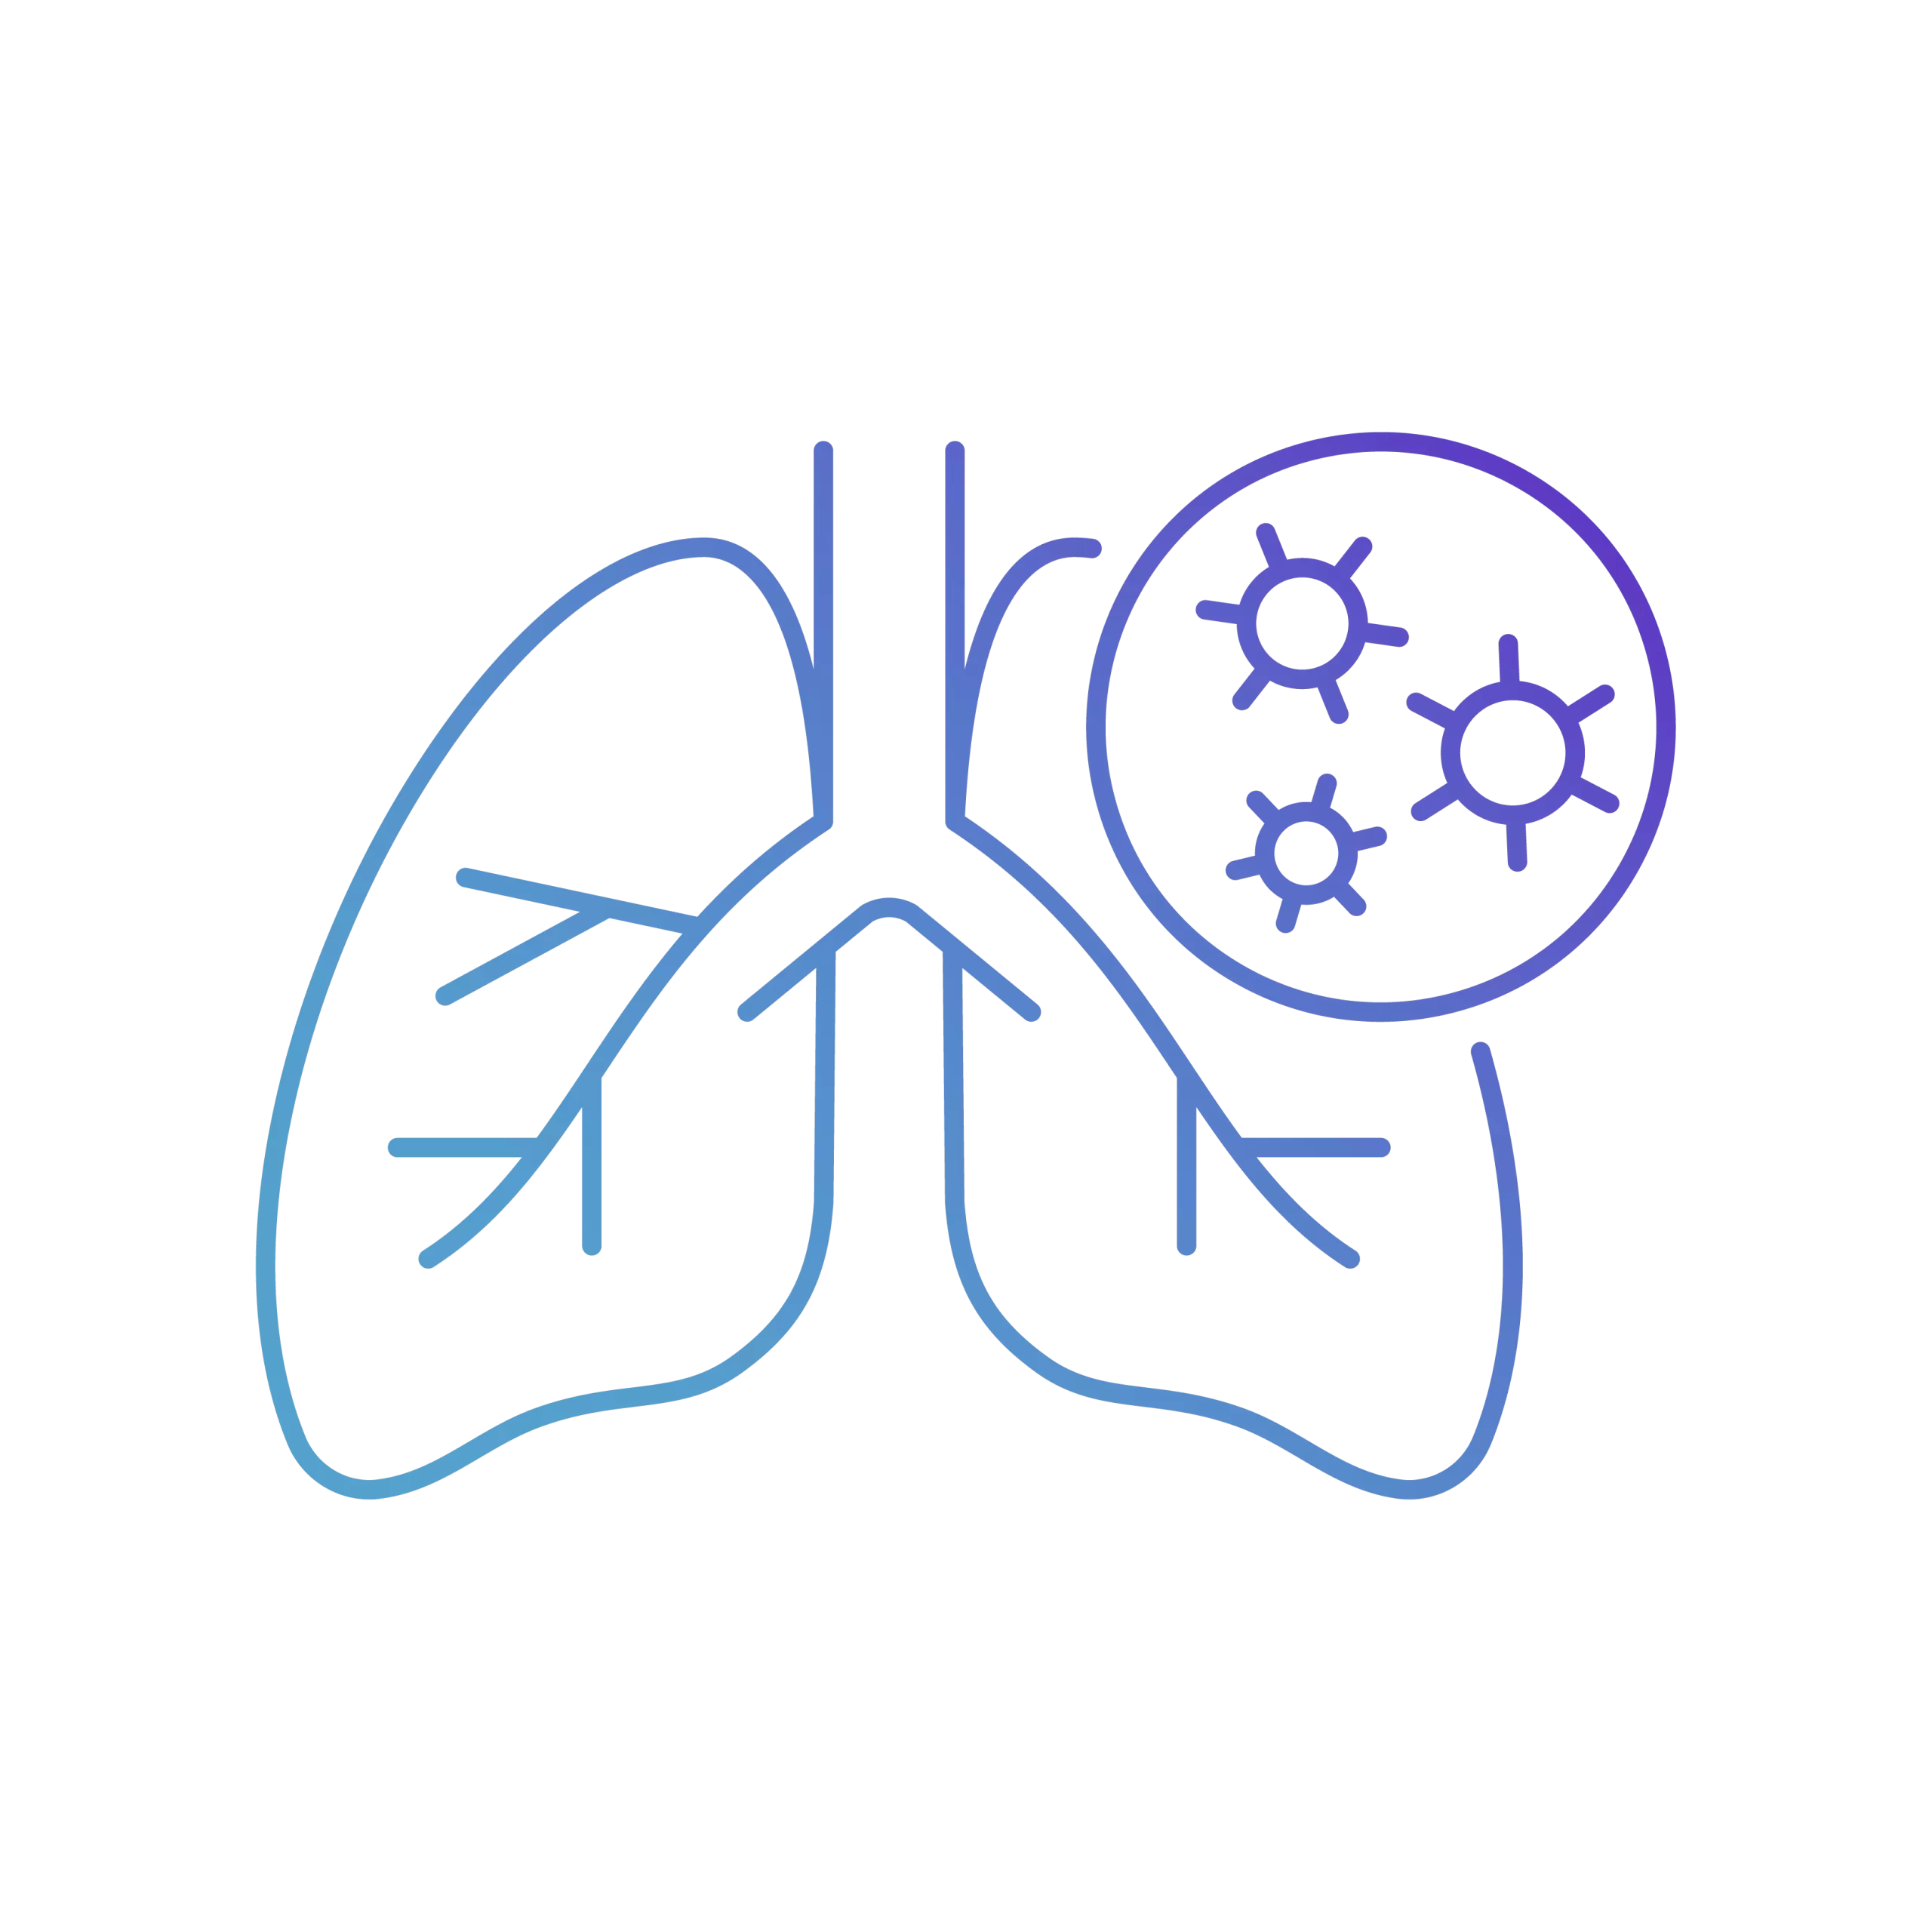 Graphic representation of human lungs with a highlighted section showing blue and purple gears, symbolizing a mechanical or technological concept.